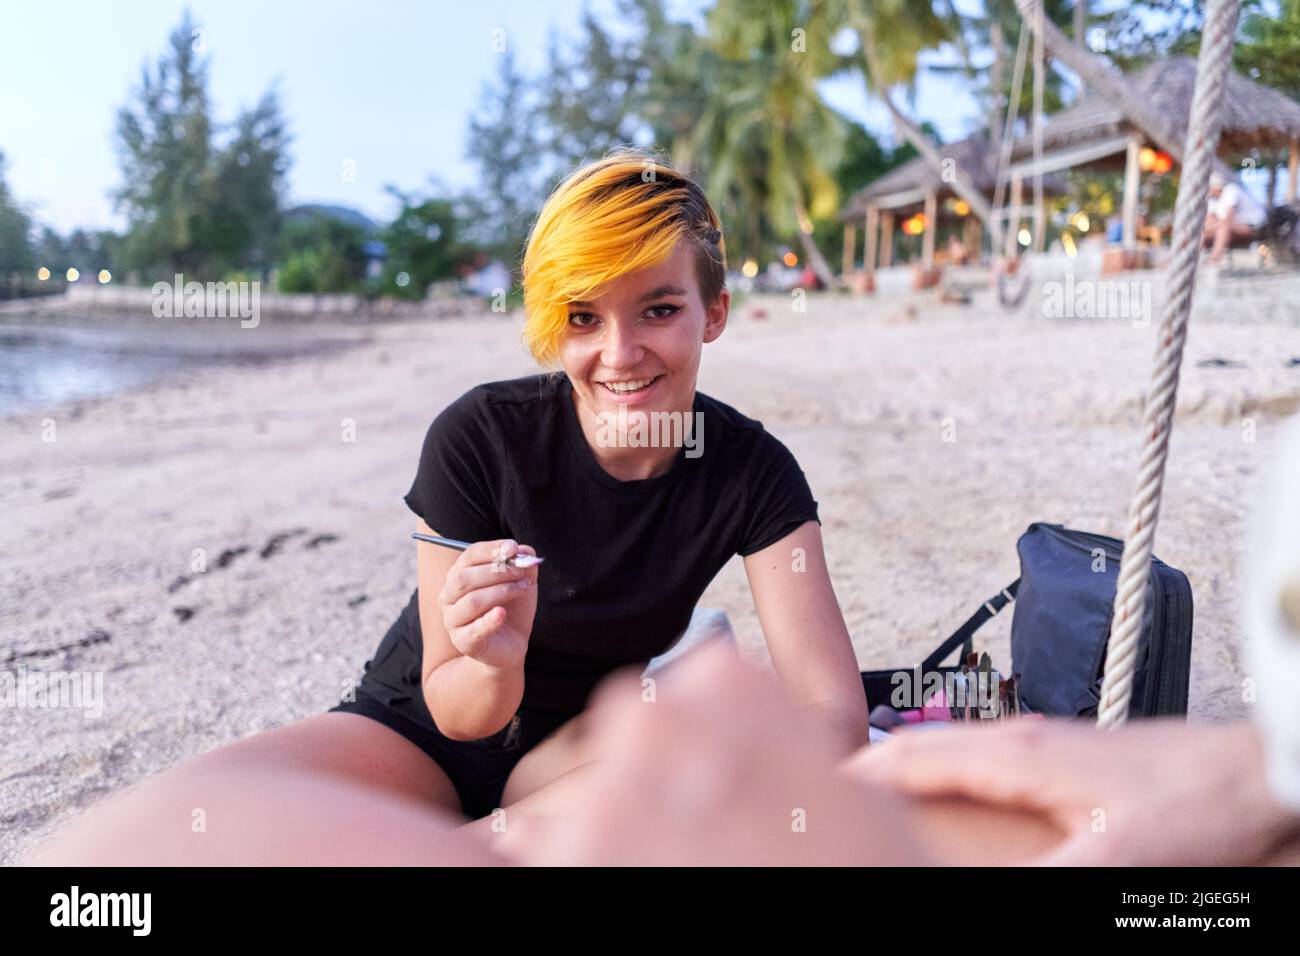 Artist smiling at the camera during a session of body art on the beach Stock Photo